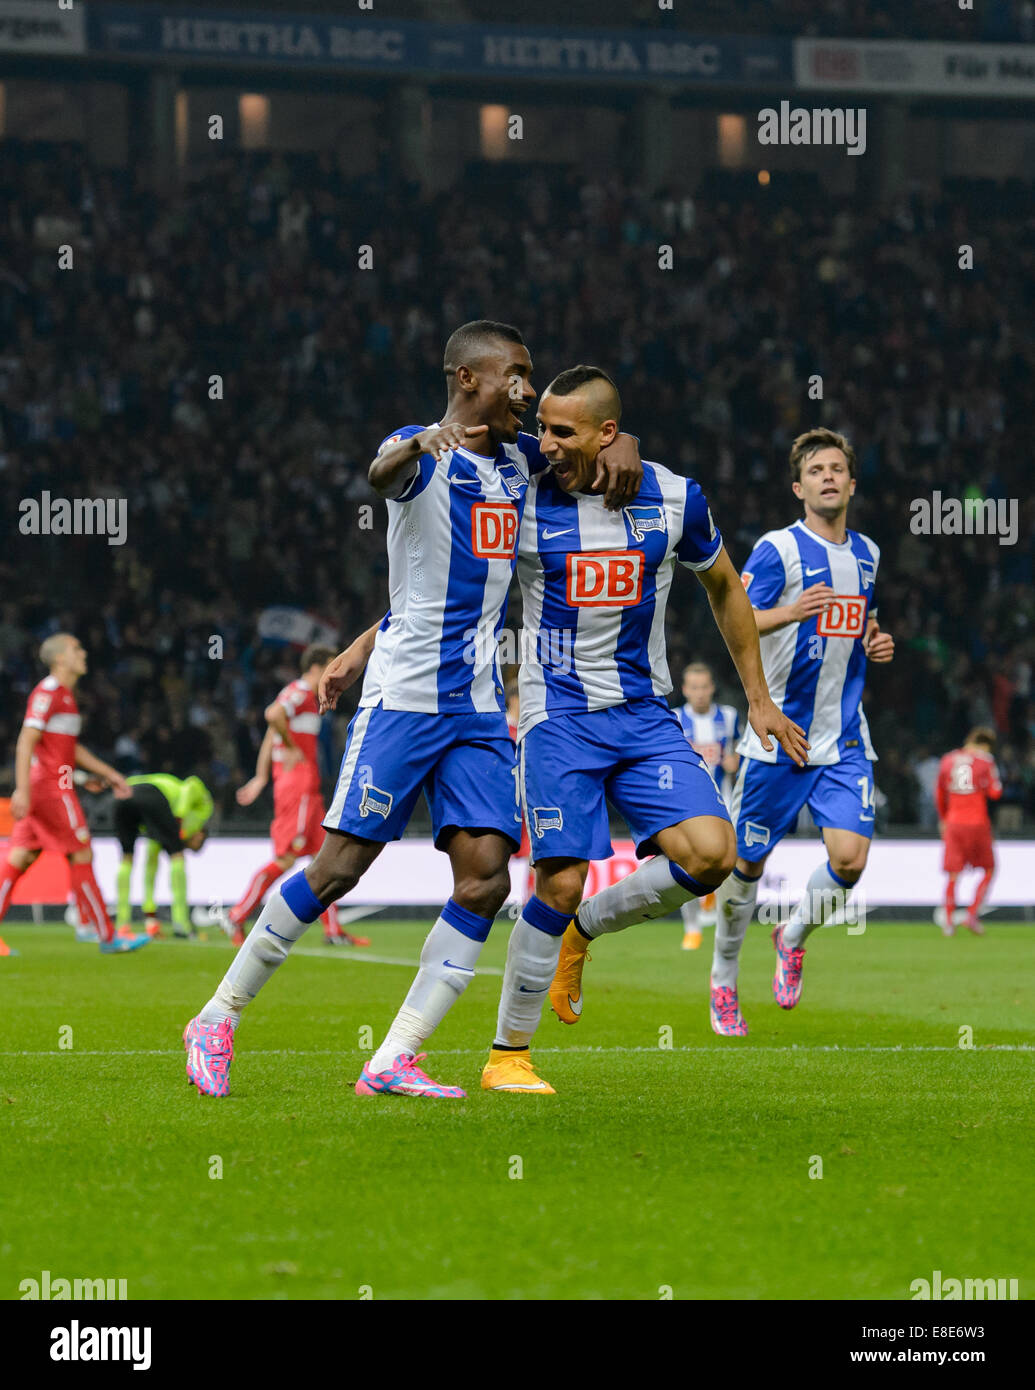 Berlin's Salomon Kalou (C) cheers after his 2:1 goal during the Bundesliga Day 7 soccer match between Hertha BSC and VfB Stuttgart at Olympiastadion in Berlin, Germany, 03 October 2014. Photo: Thomas Eisenhuth/dpa - NO WIRE SERVICE - Stock Photo